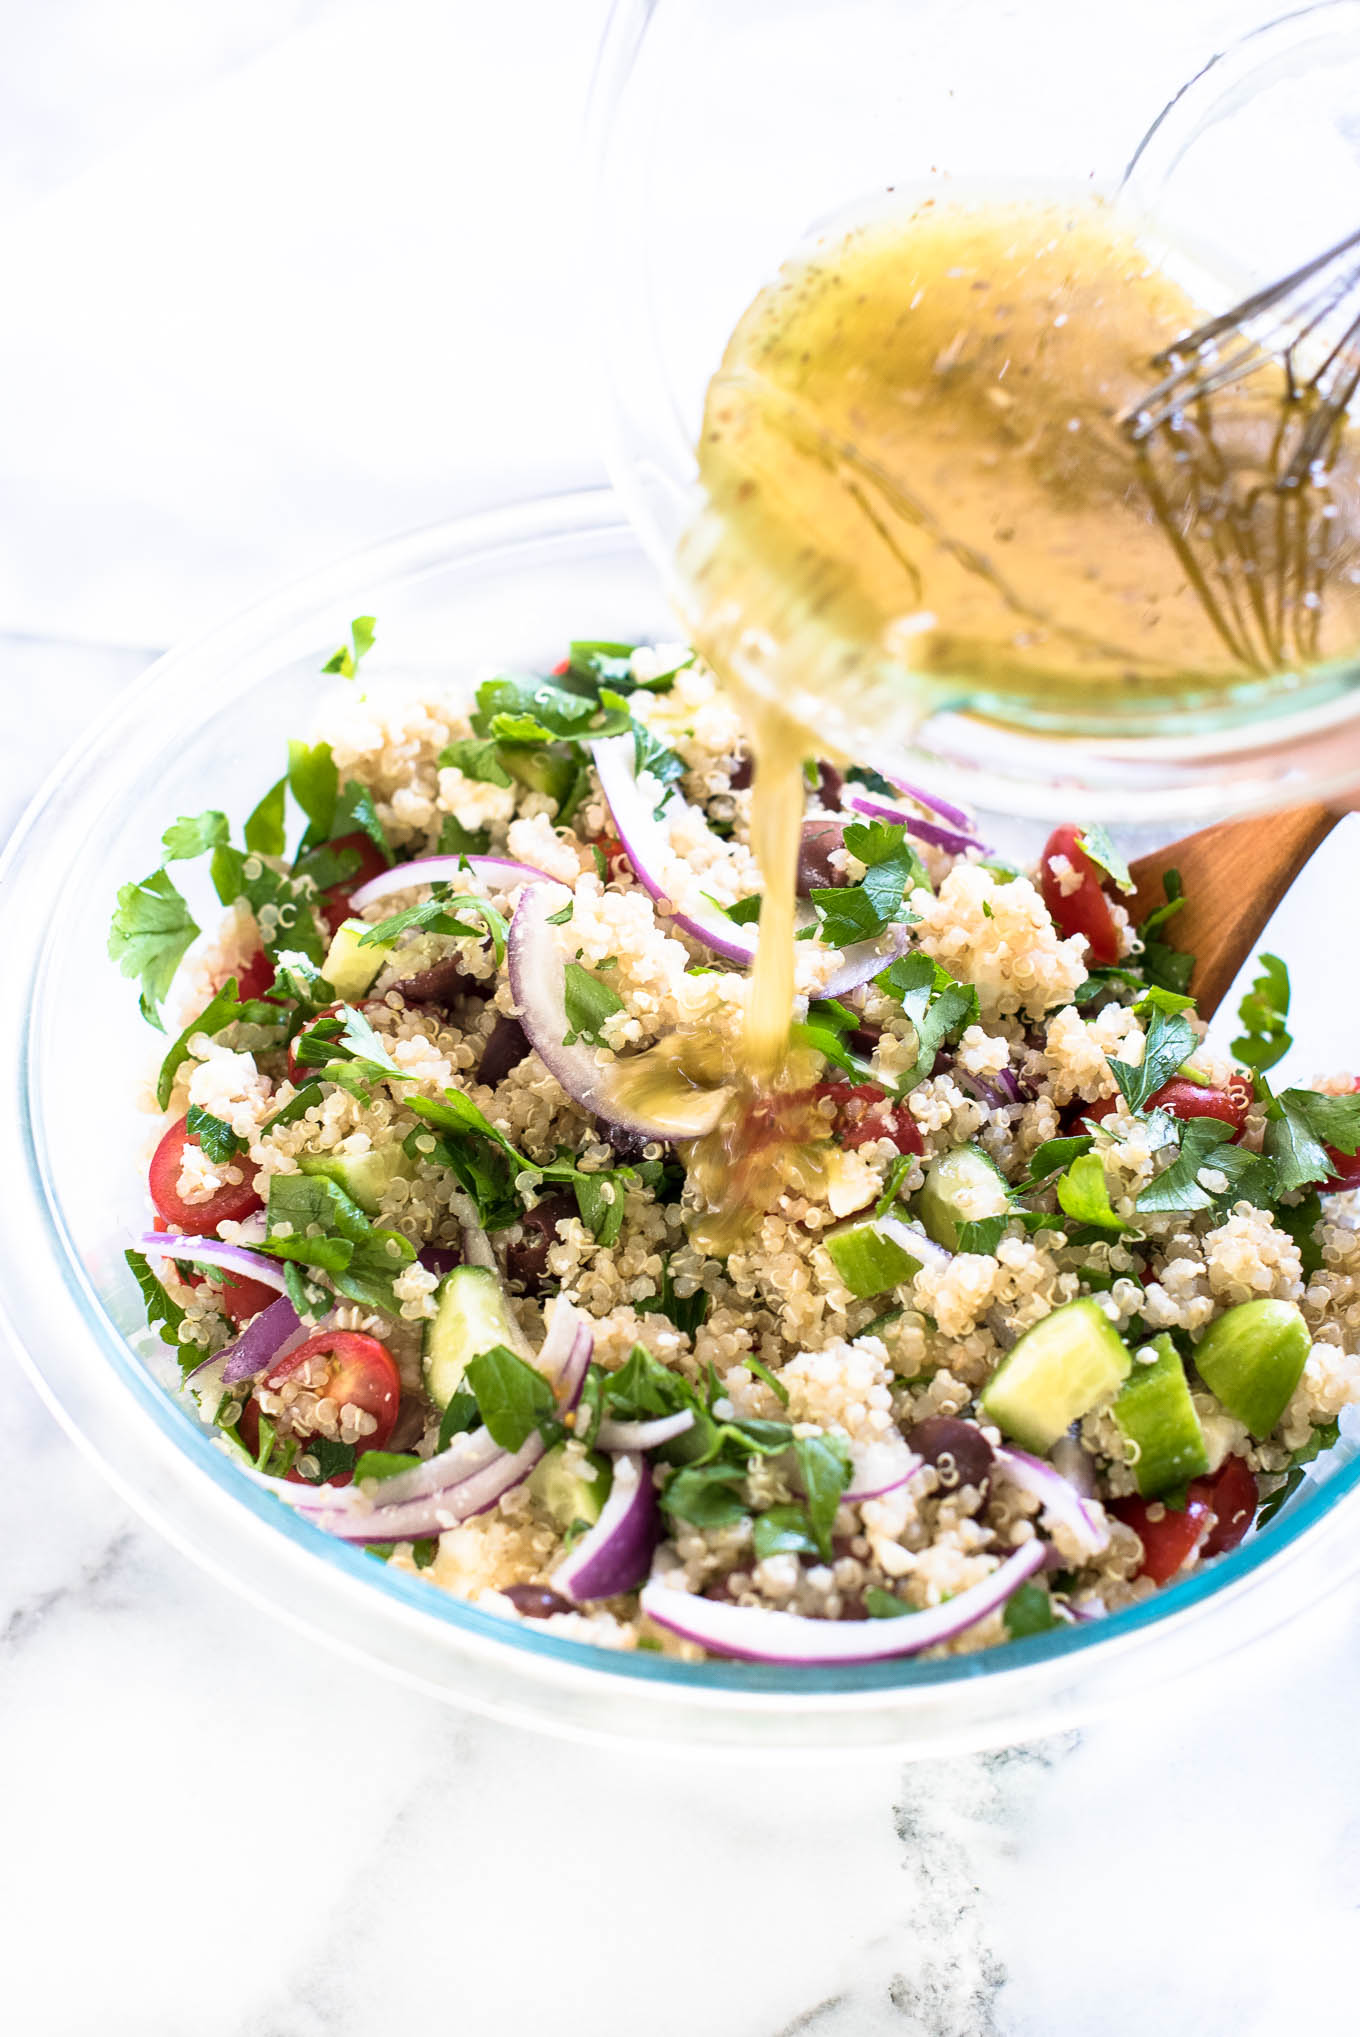 Greek Quinoa Salad is bursting with Mediterranean flavors and is a great make-ahead vegetarian and gluten free salad.